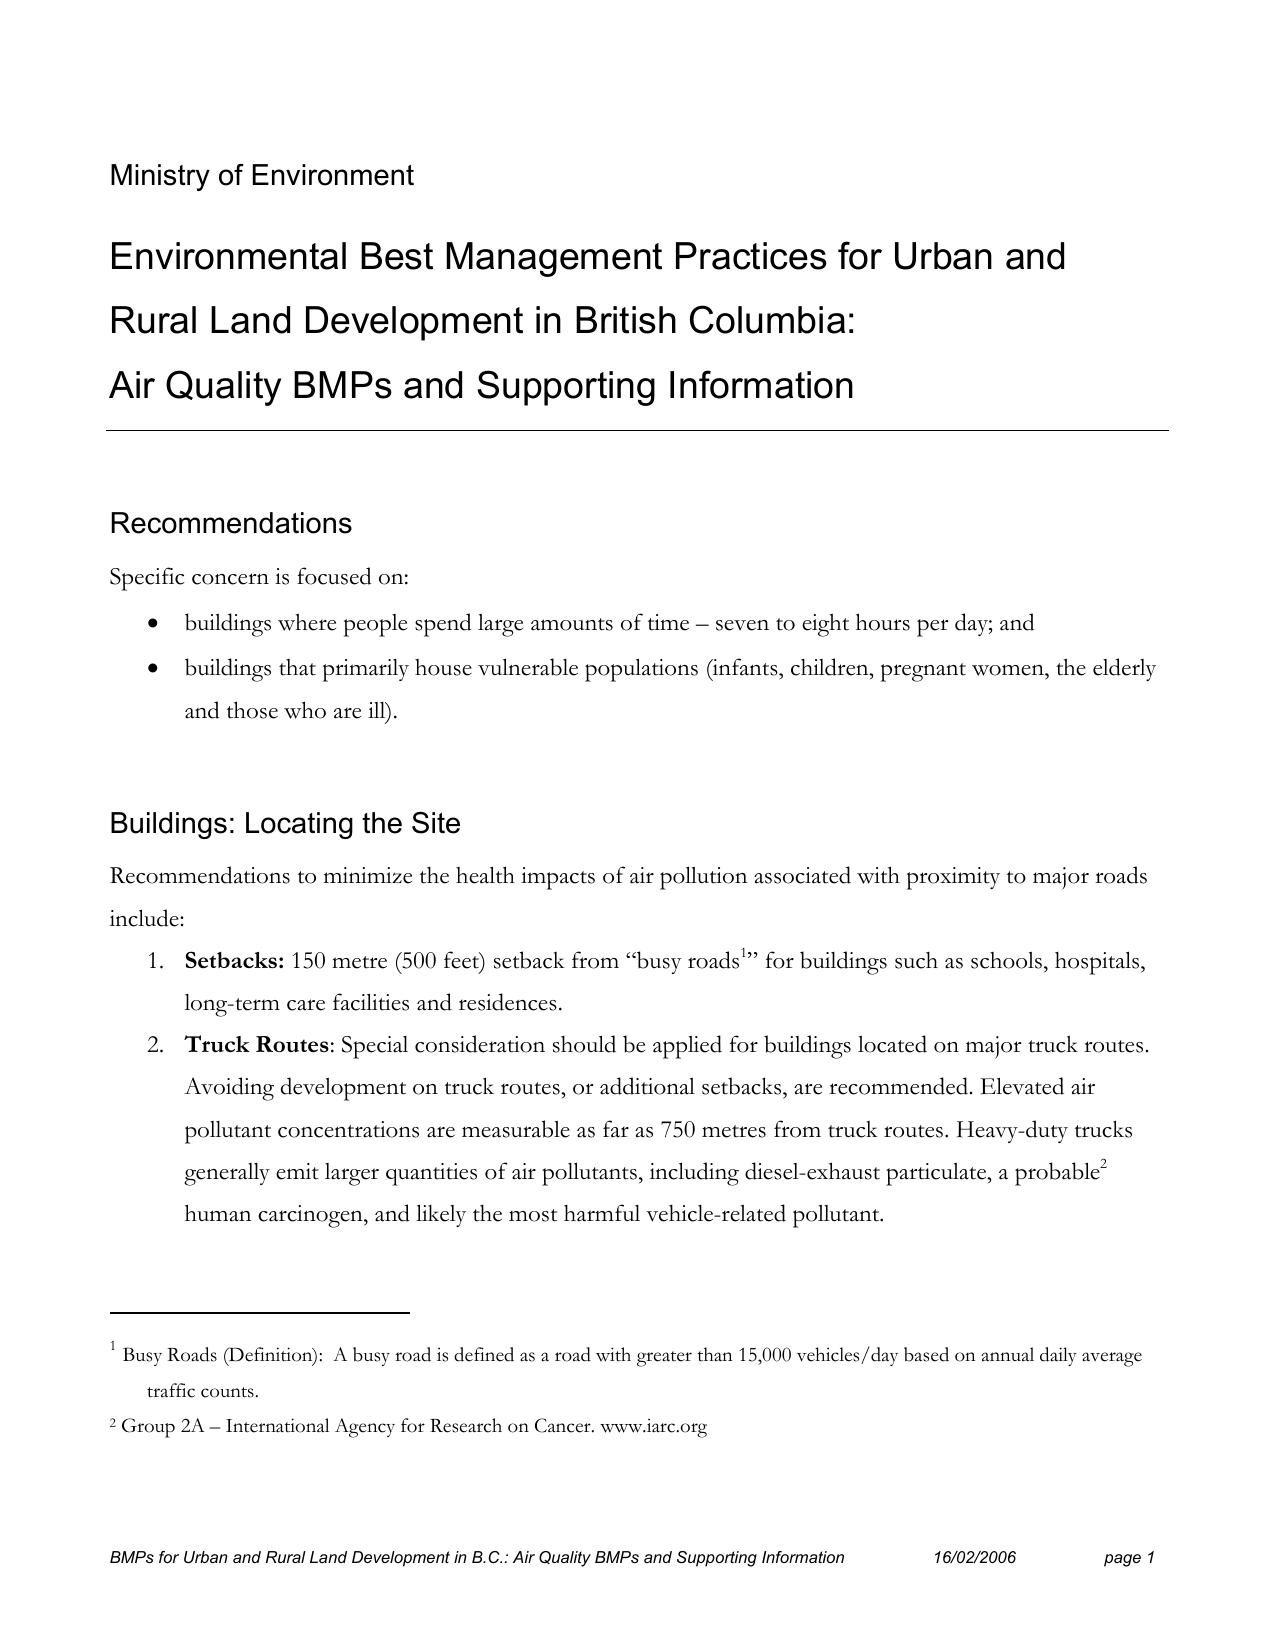 Environmental Best Management Practices for Urban and Rural Land Development in British Columbia